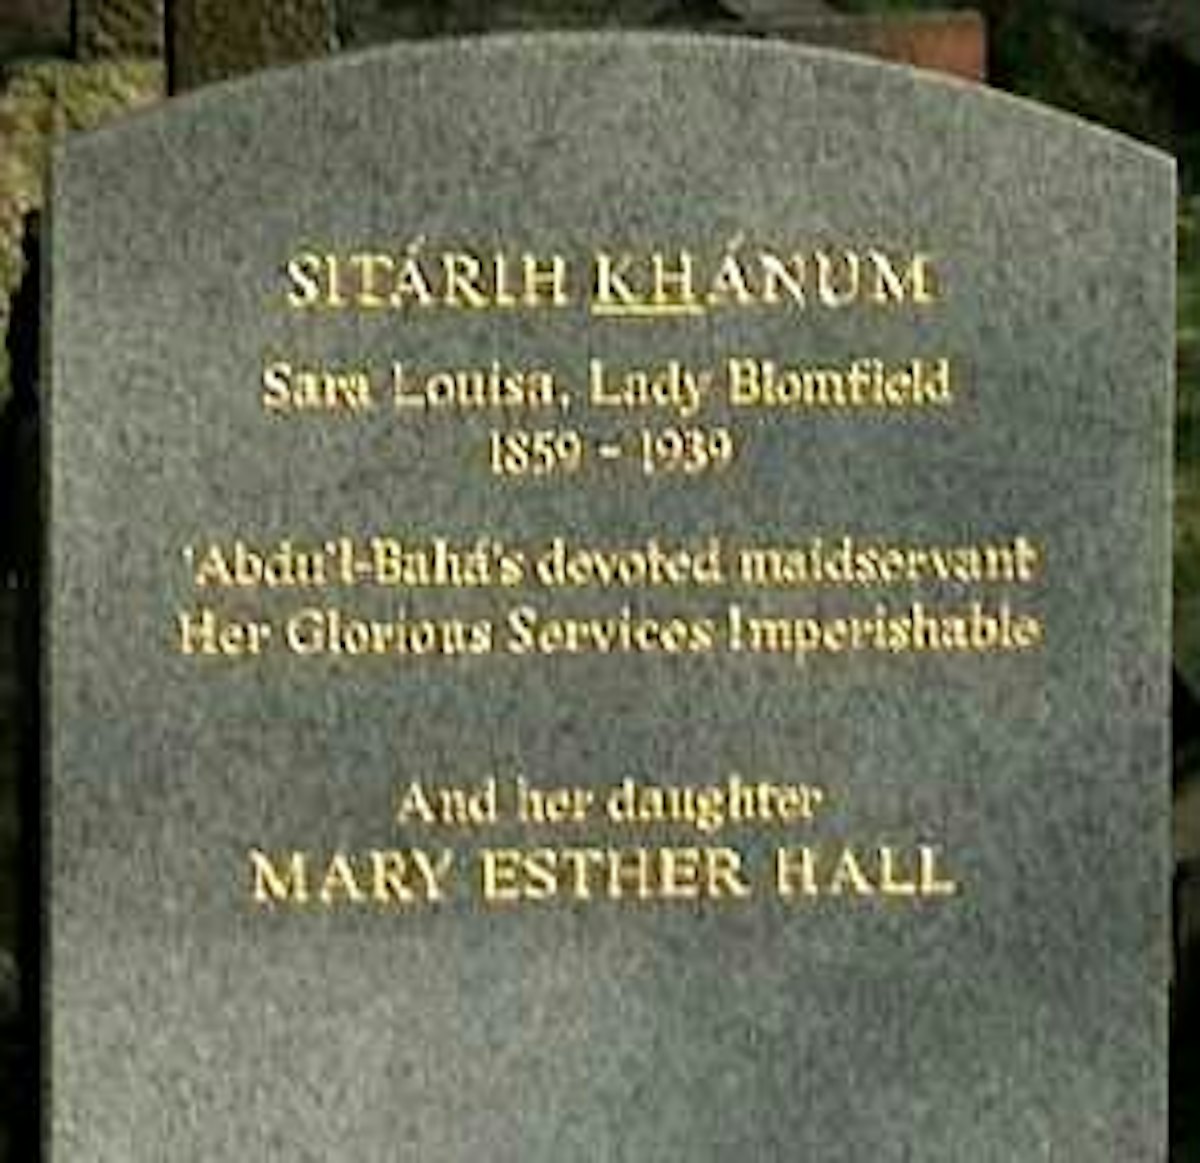 New headstone for Lady Blomfield and her daughter.